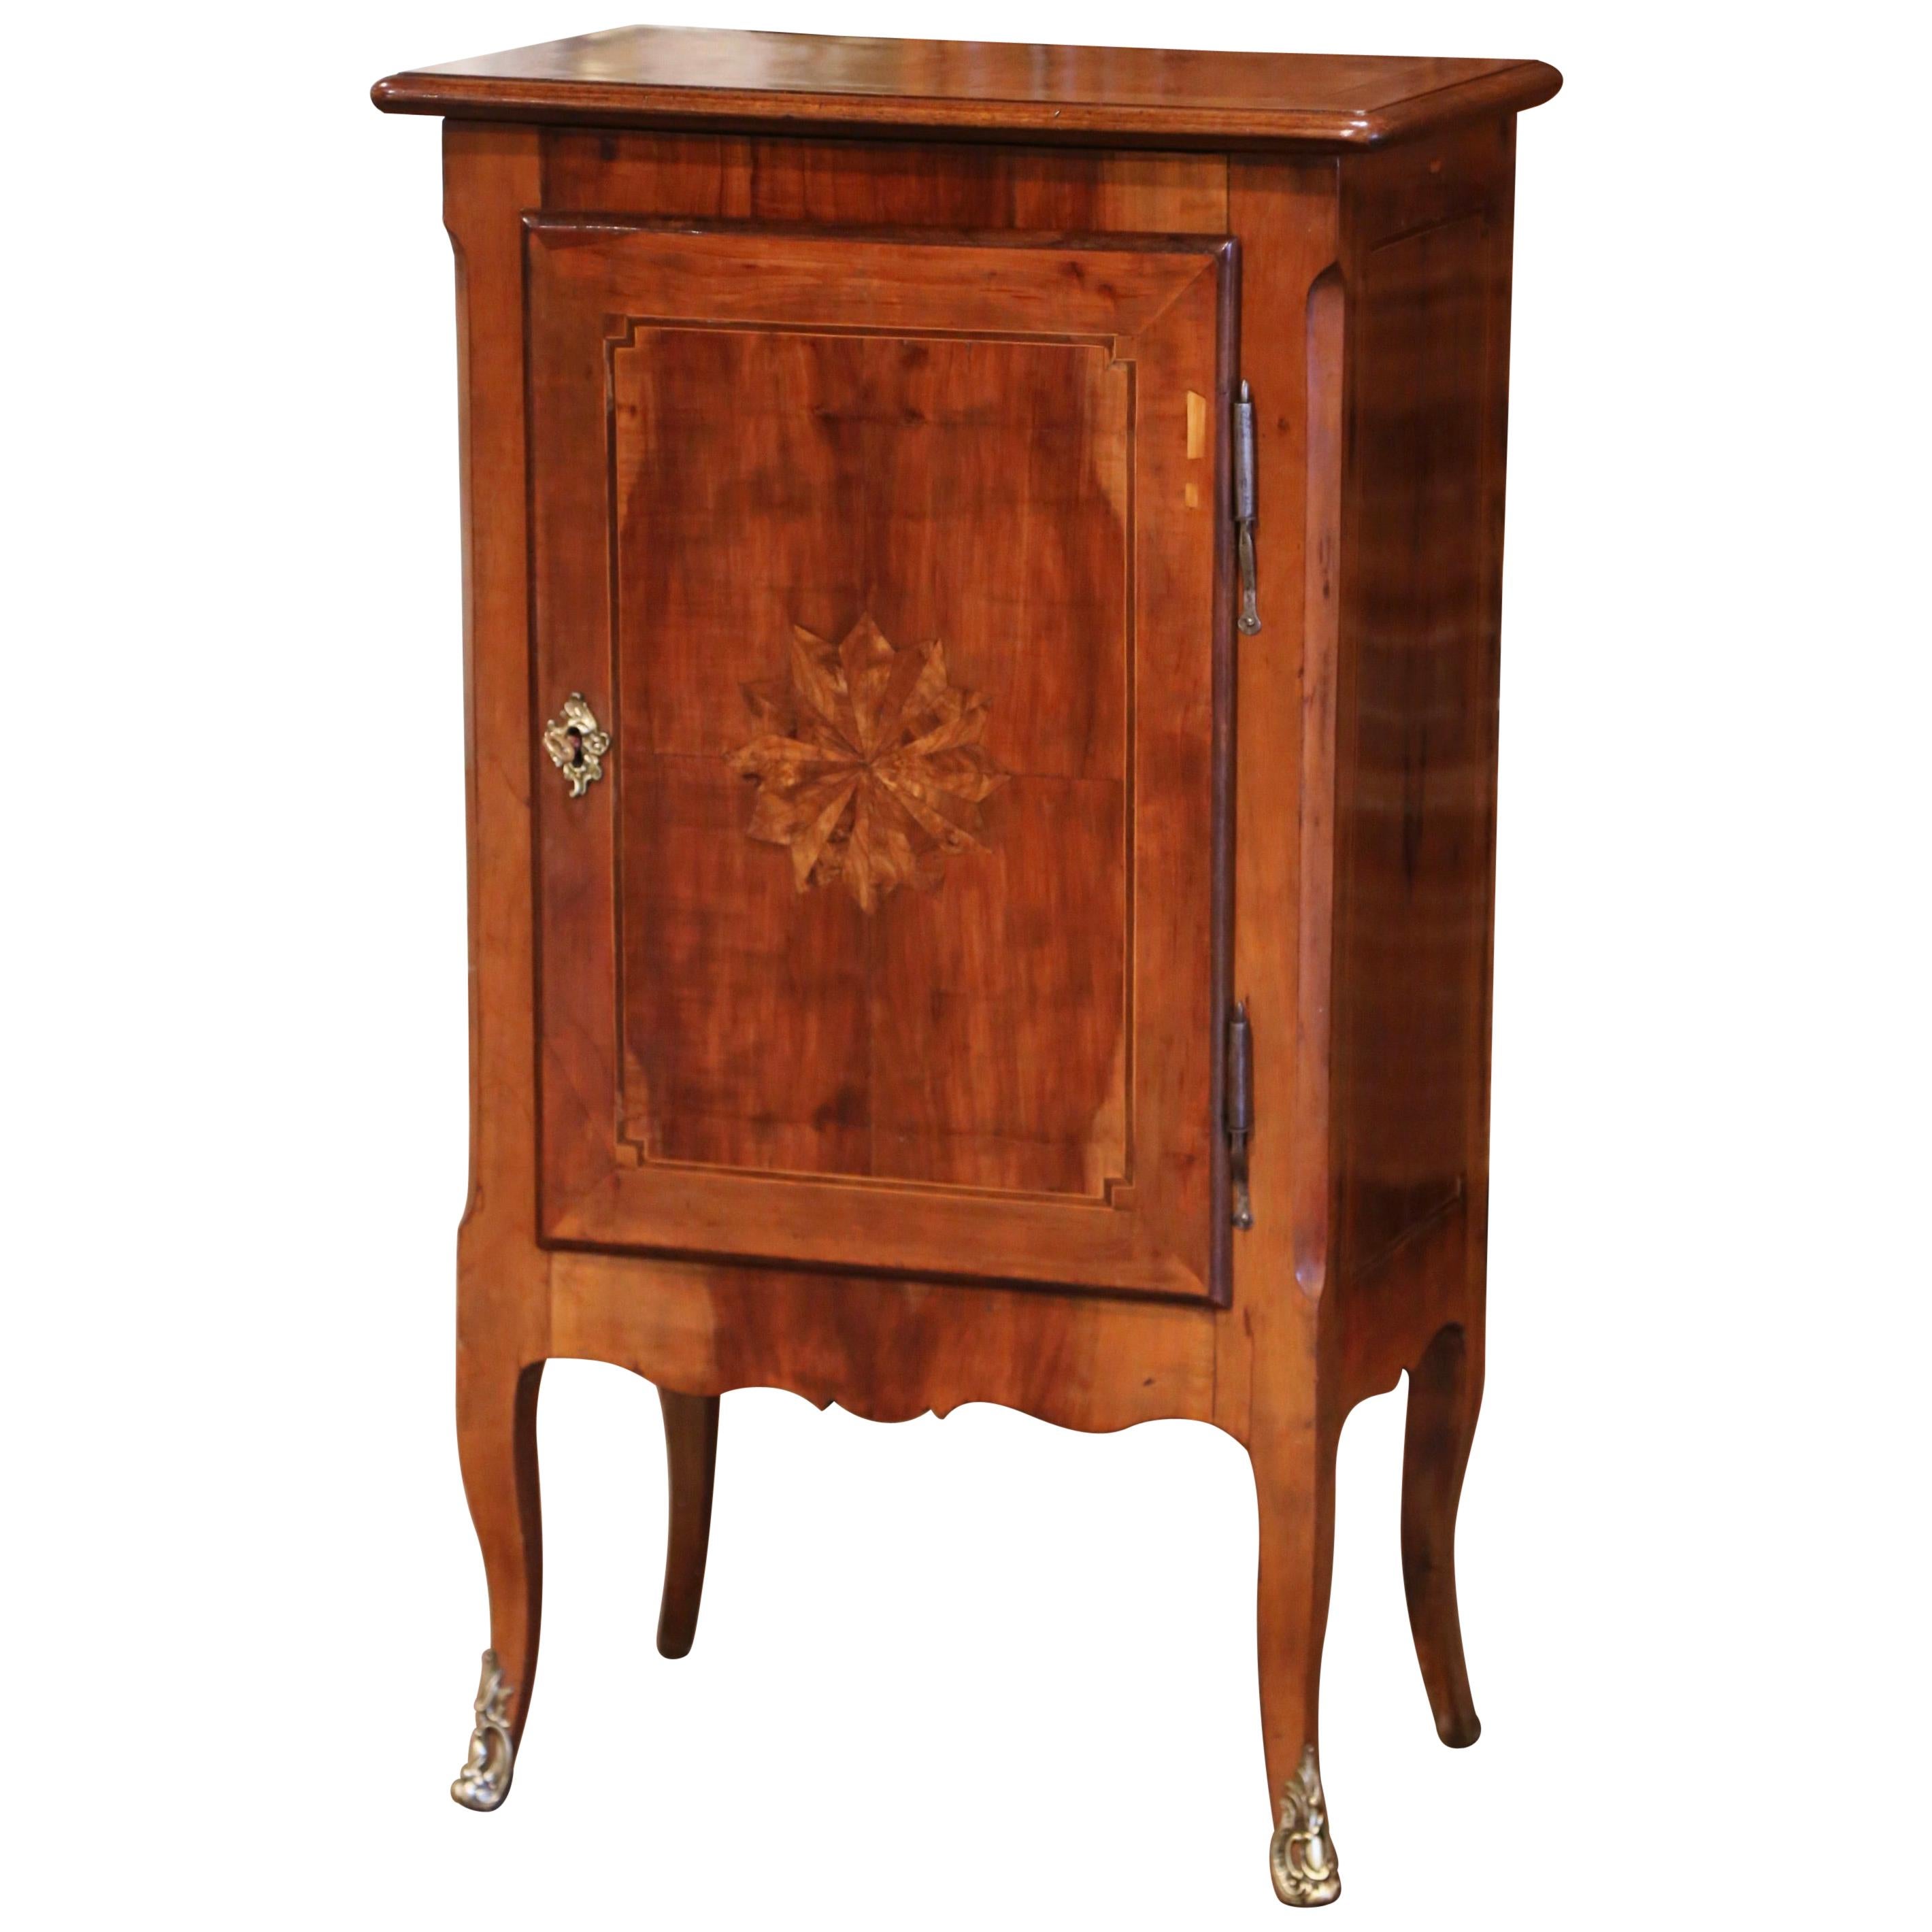 19th Century French Louis XV Inlaid Walnut Confiturier Cabinet from Paris